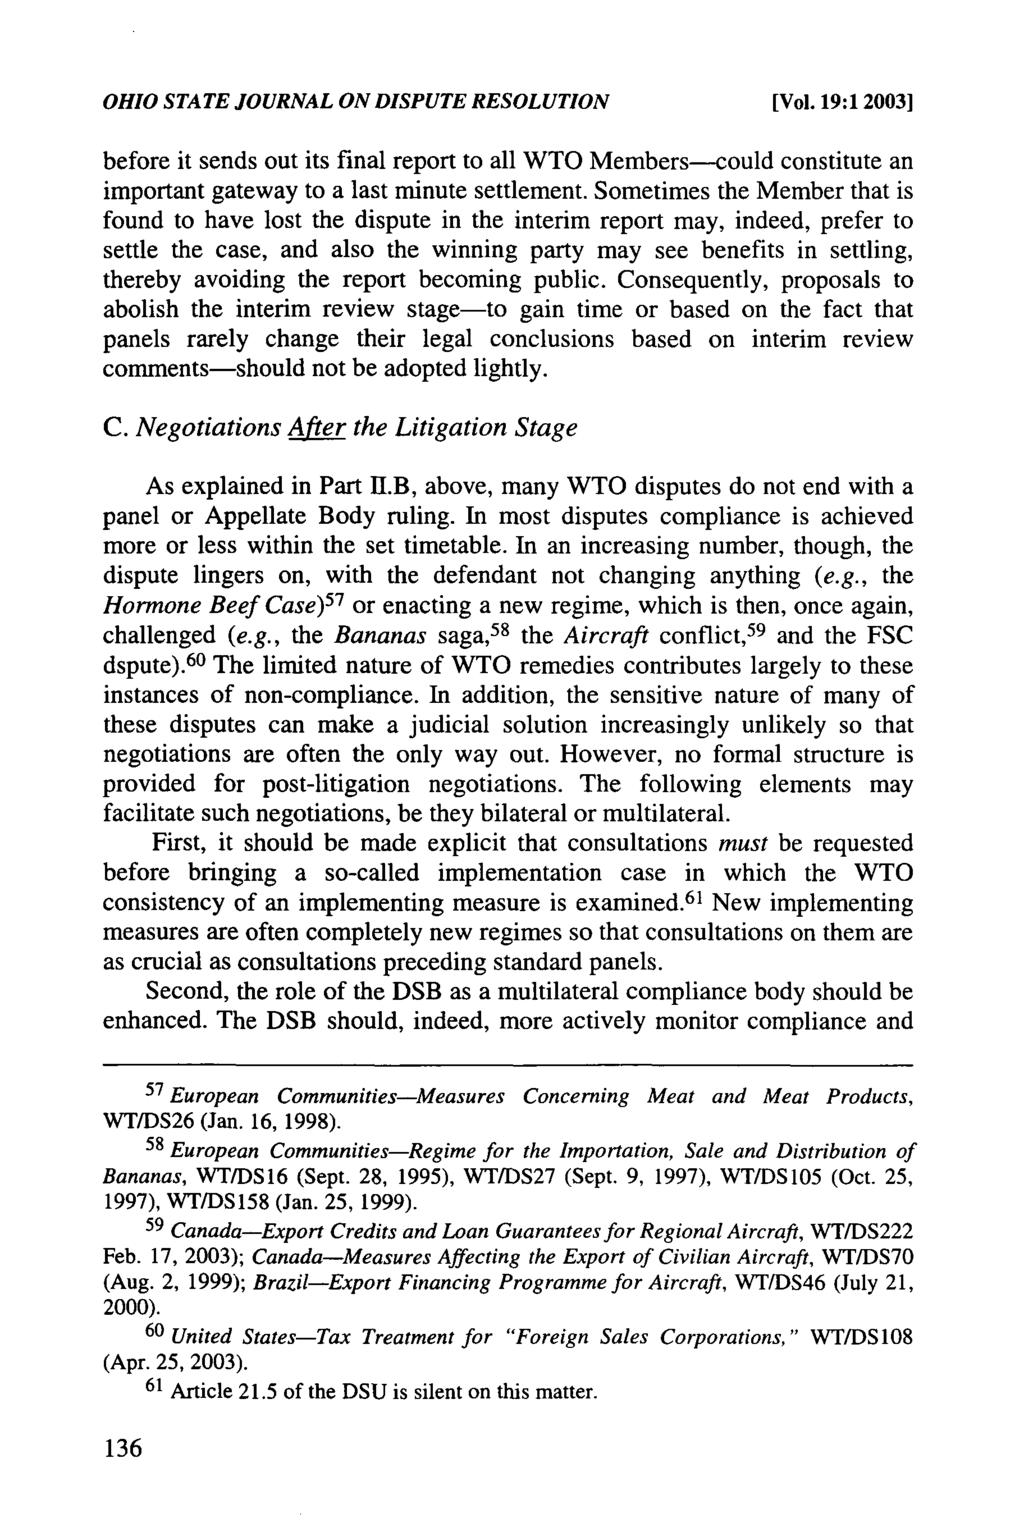 OHIO STATE JOURNAL ON DISPUTE RESOLUTION [Vol. 19:12003] before it sends out its final report to all WTO Members-could constitute an important gateway to a last minute settlement.